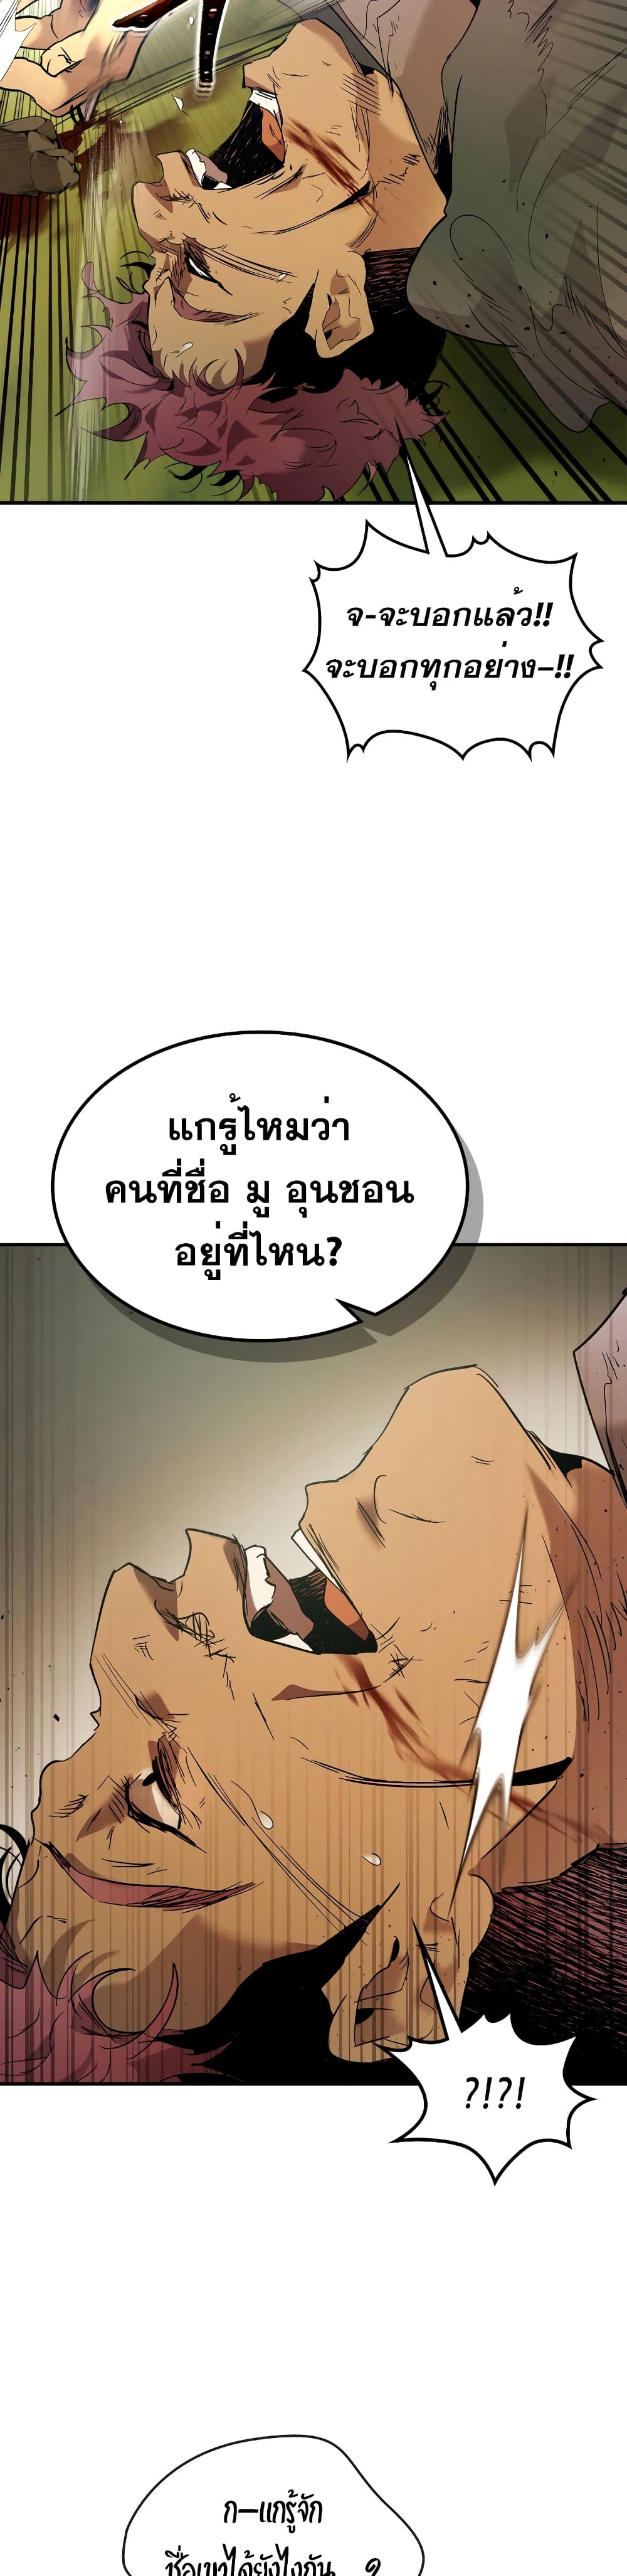 Leveling With The Gods 23 แปลไทย